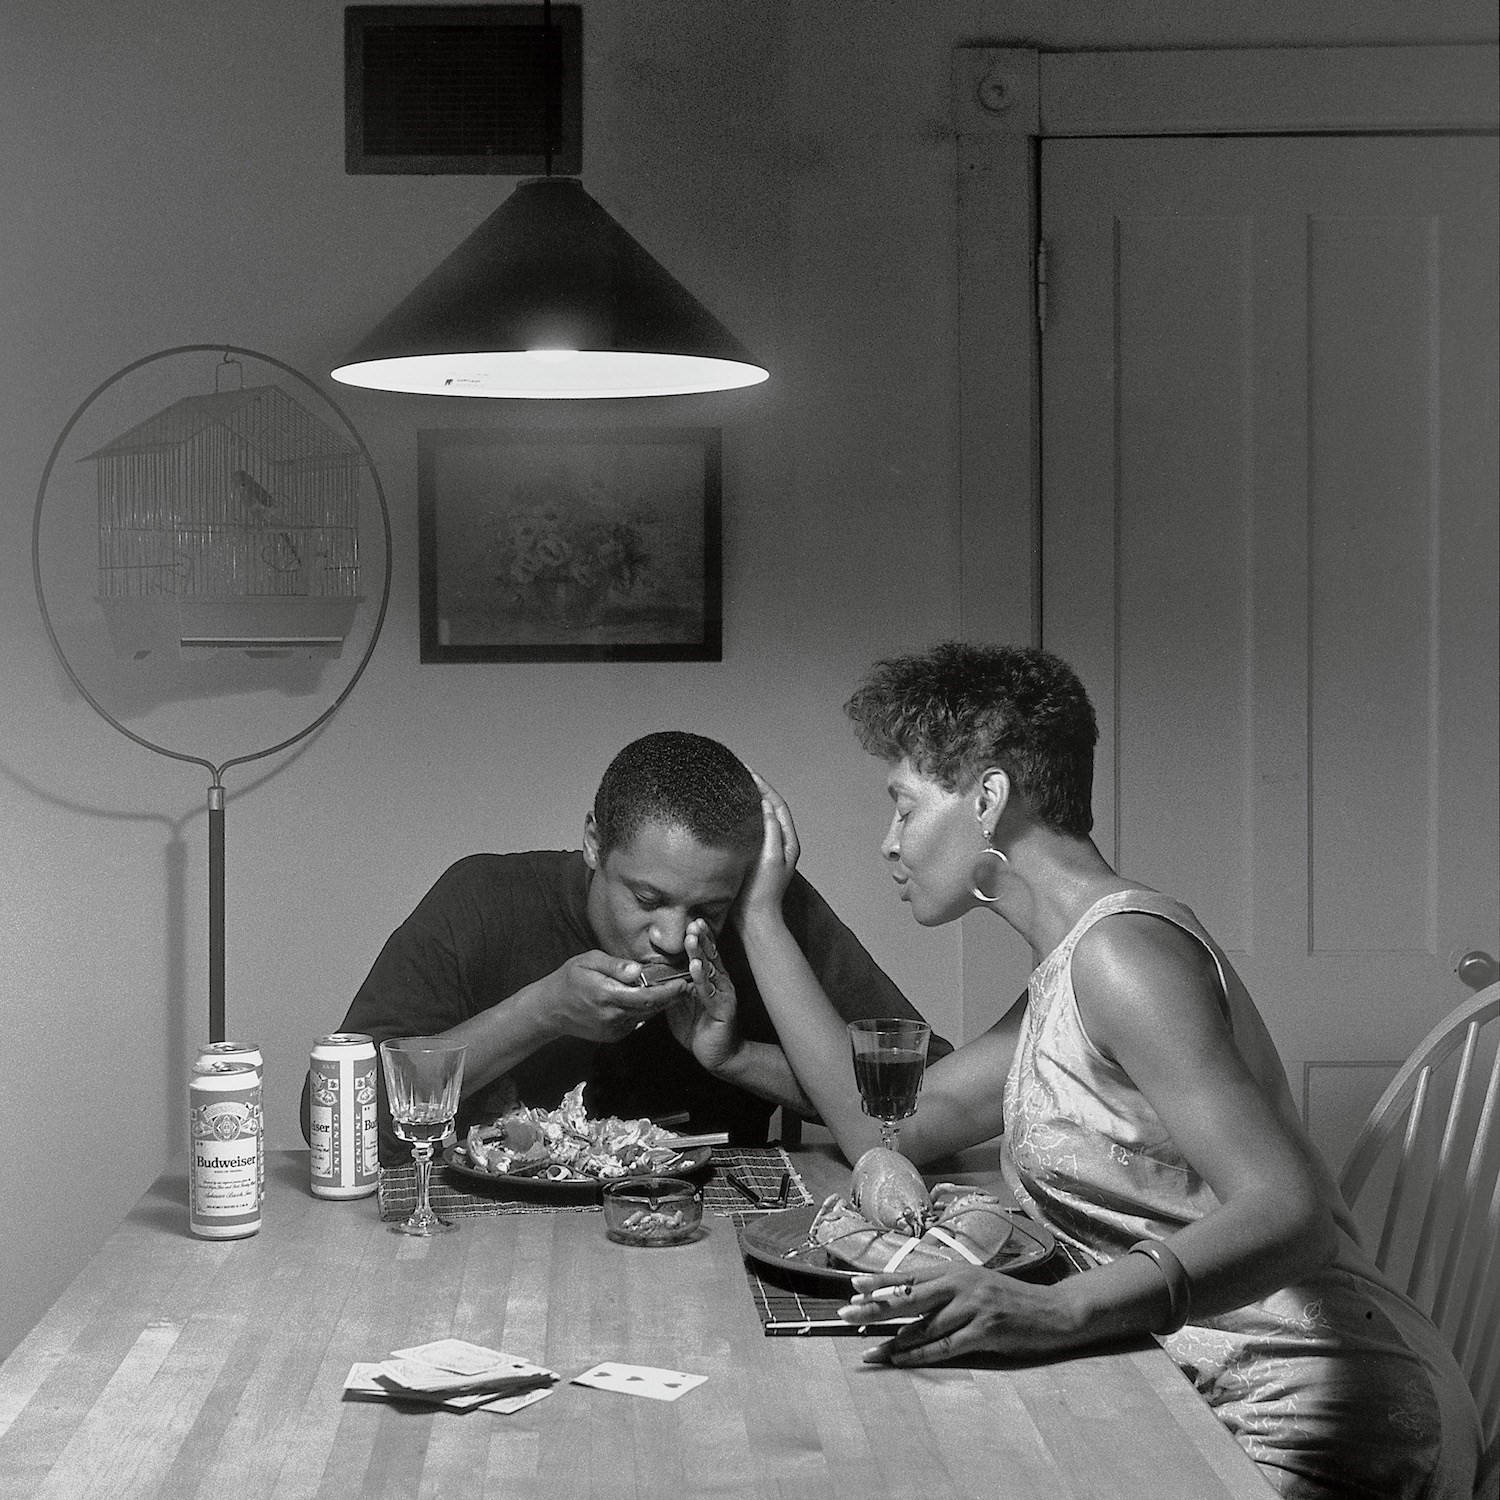 Carrie Mae Weems, Kitchen Table Series (1989-90) 2016